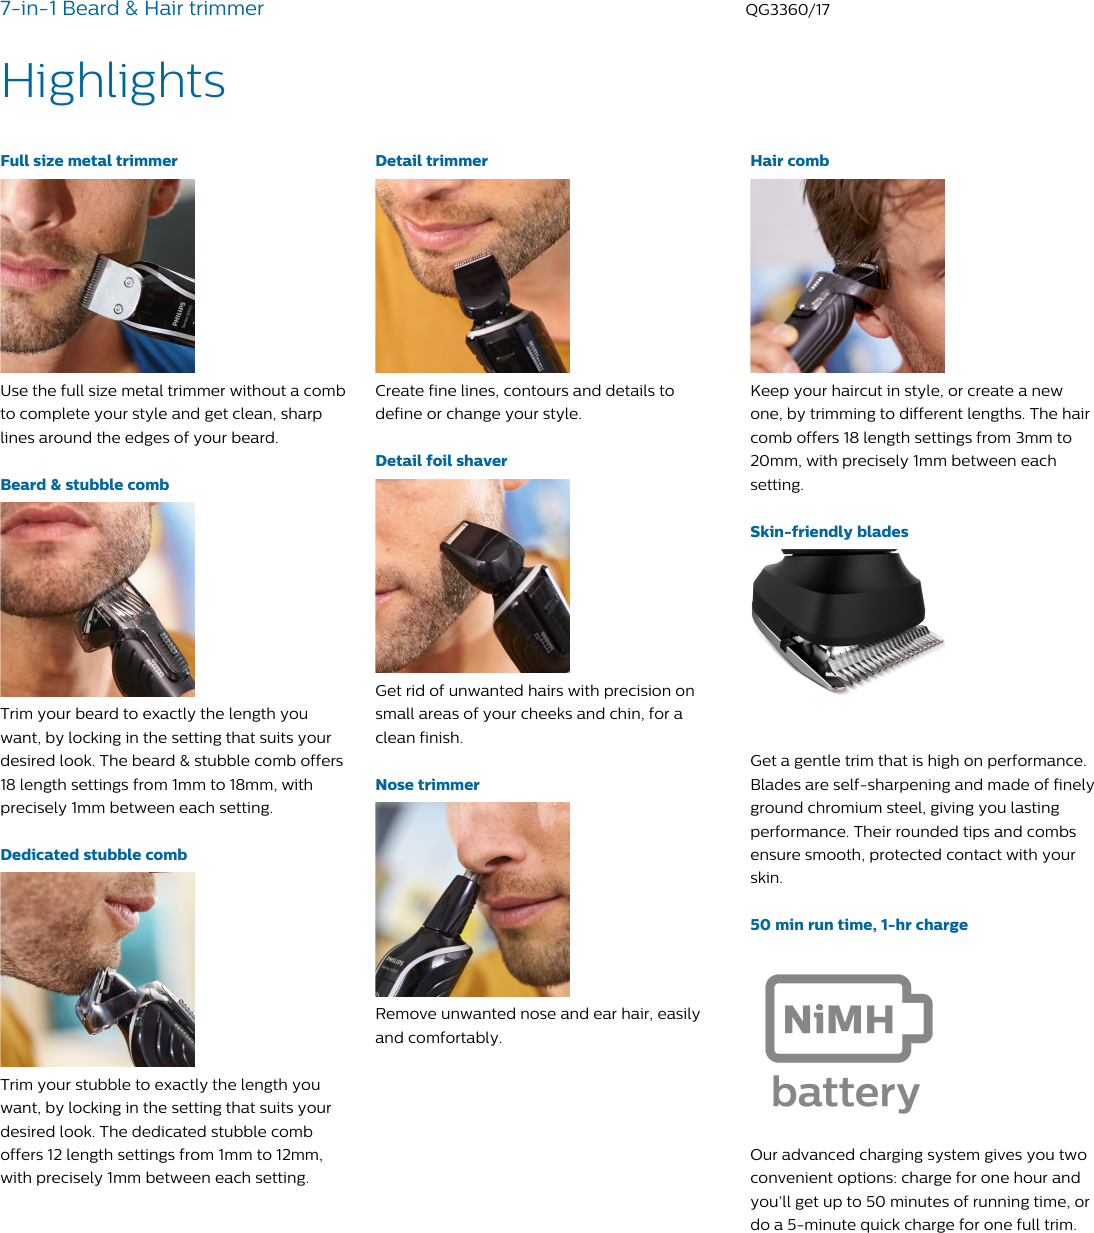 philips 7 in 1 beard and hair trimmer